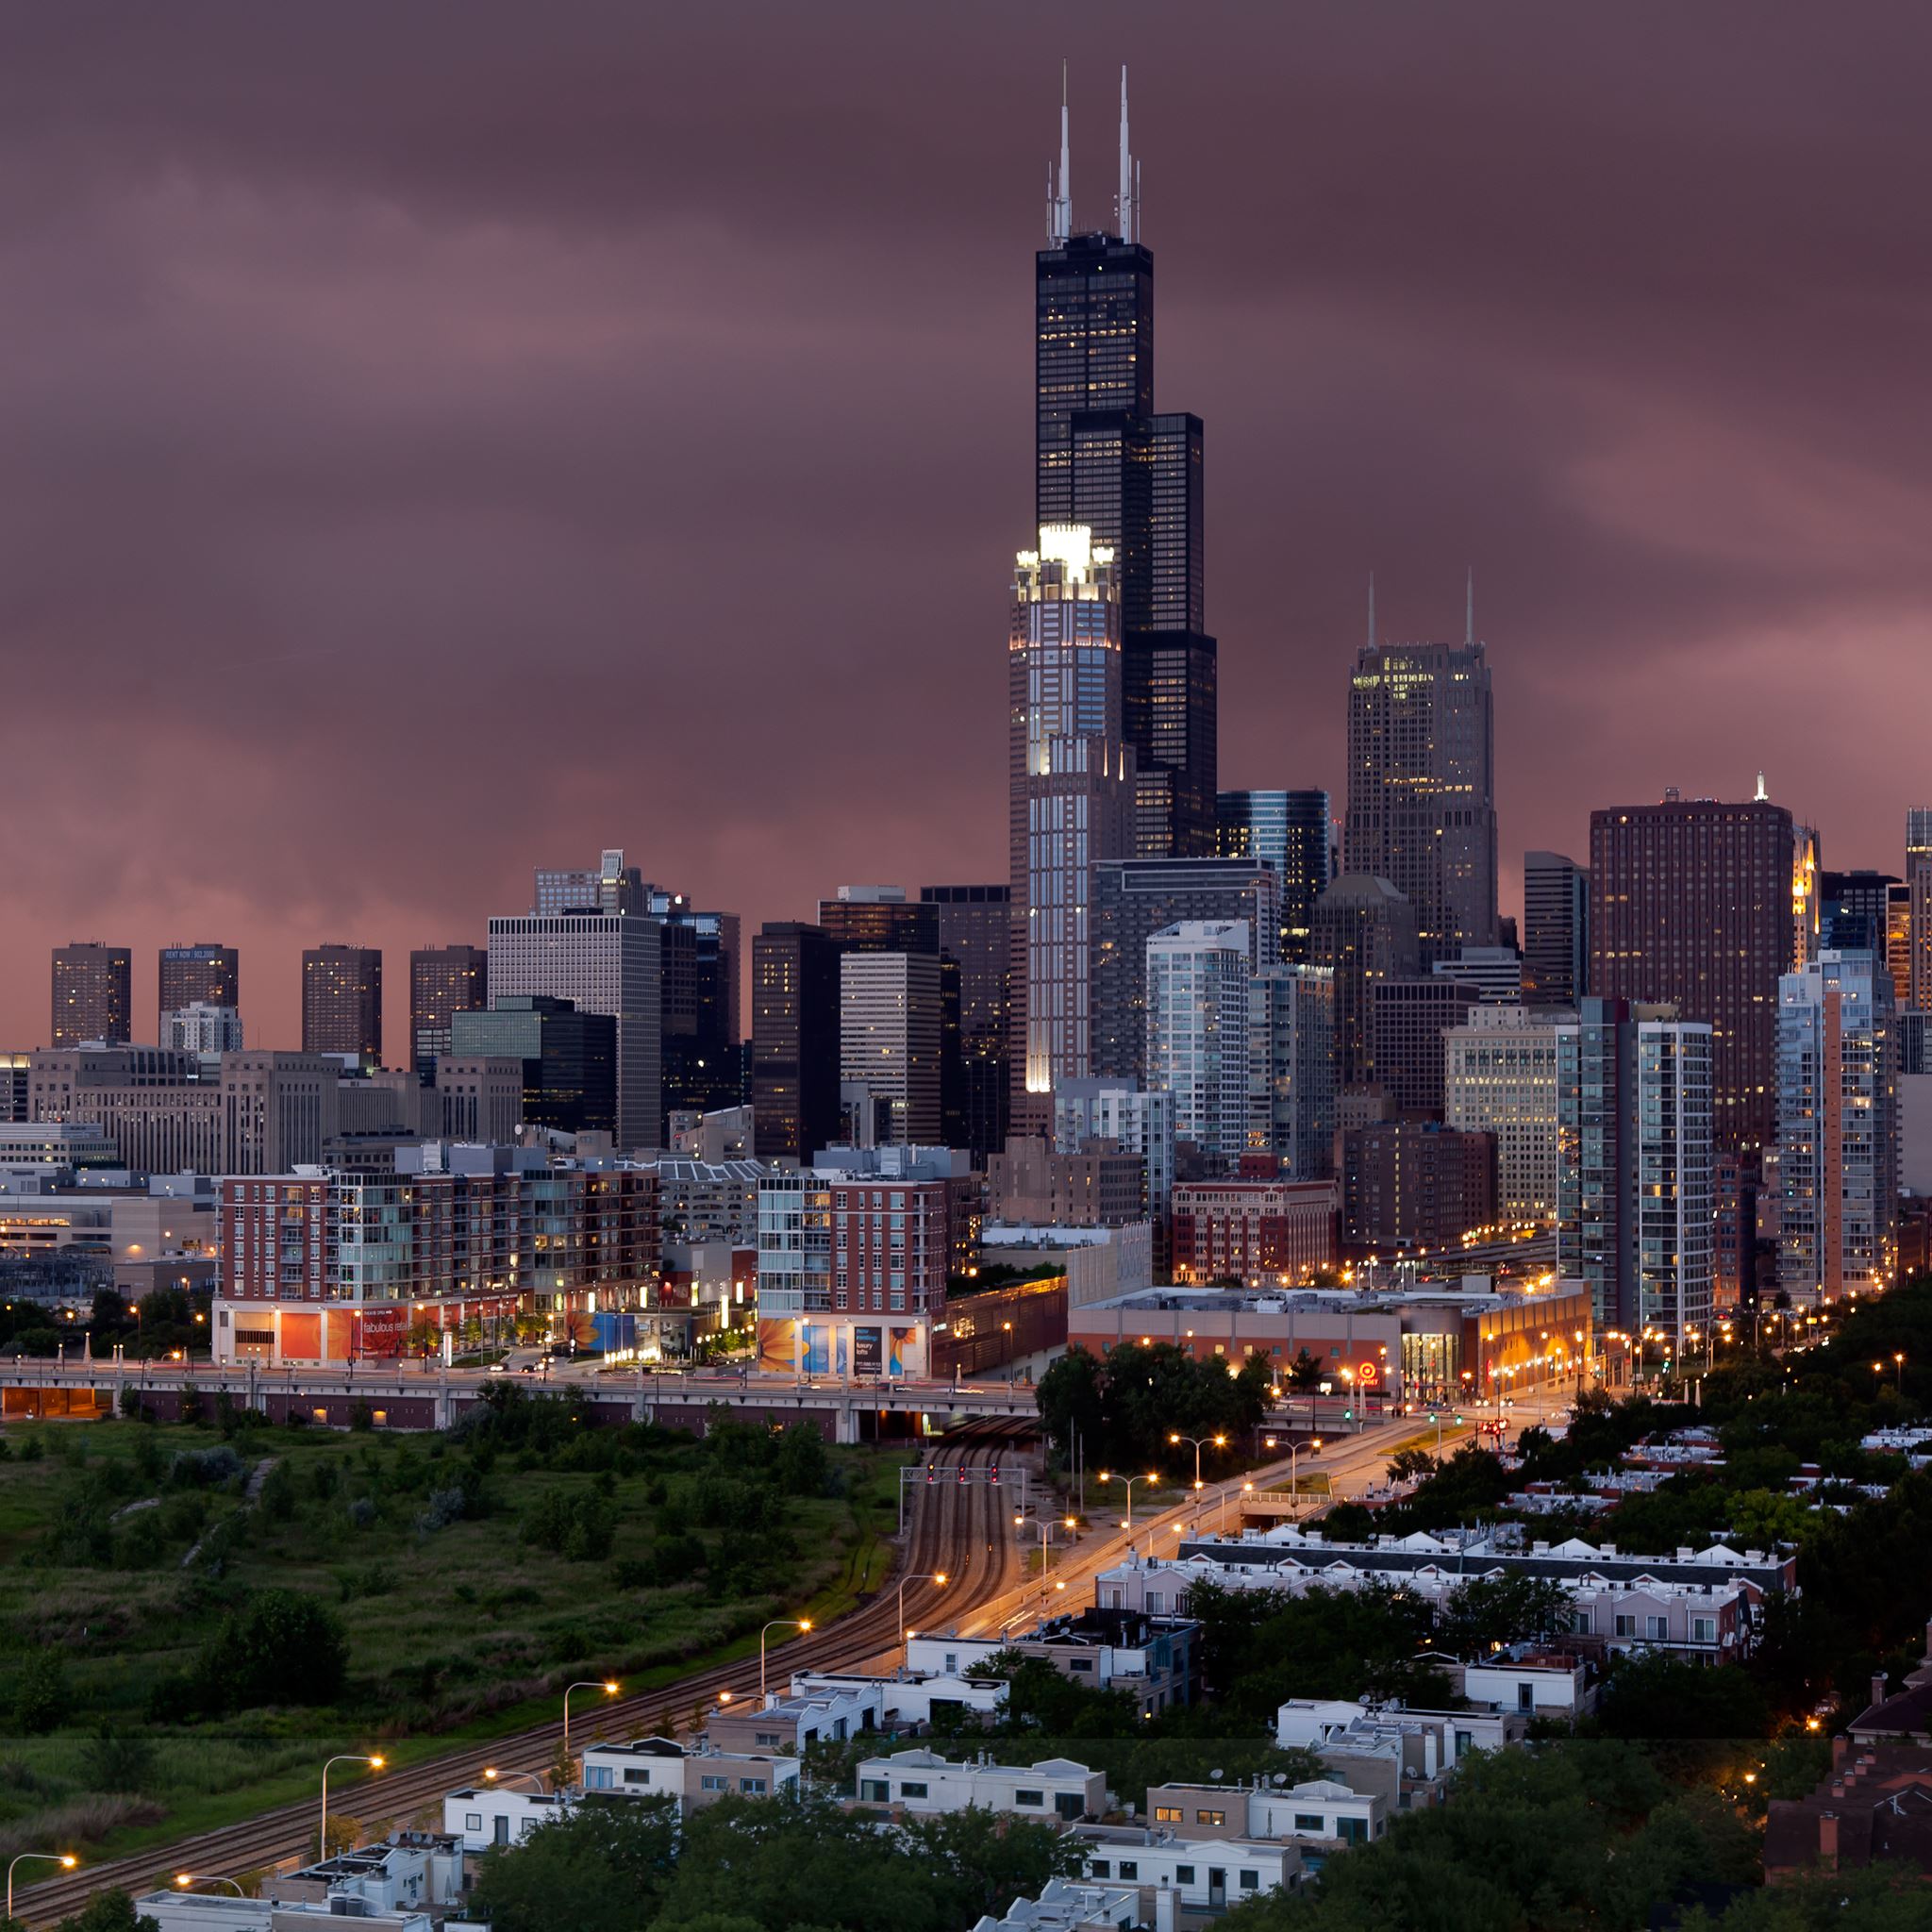 Sunset and Storm in Chicago iPad Air Wallpaper Free Download